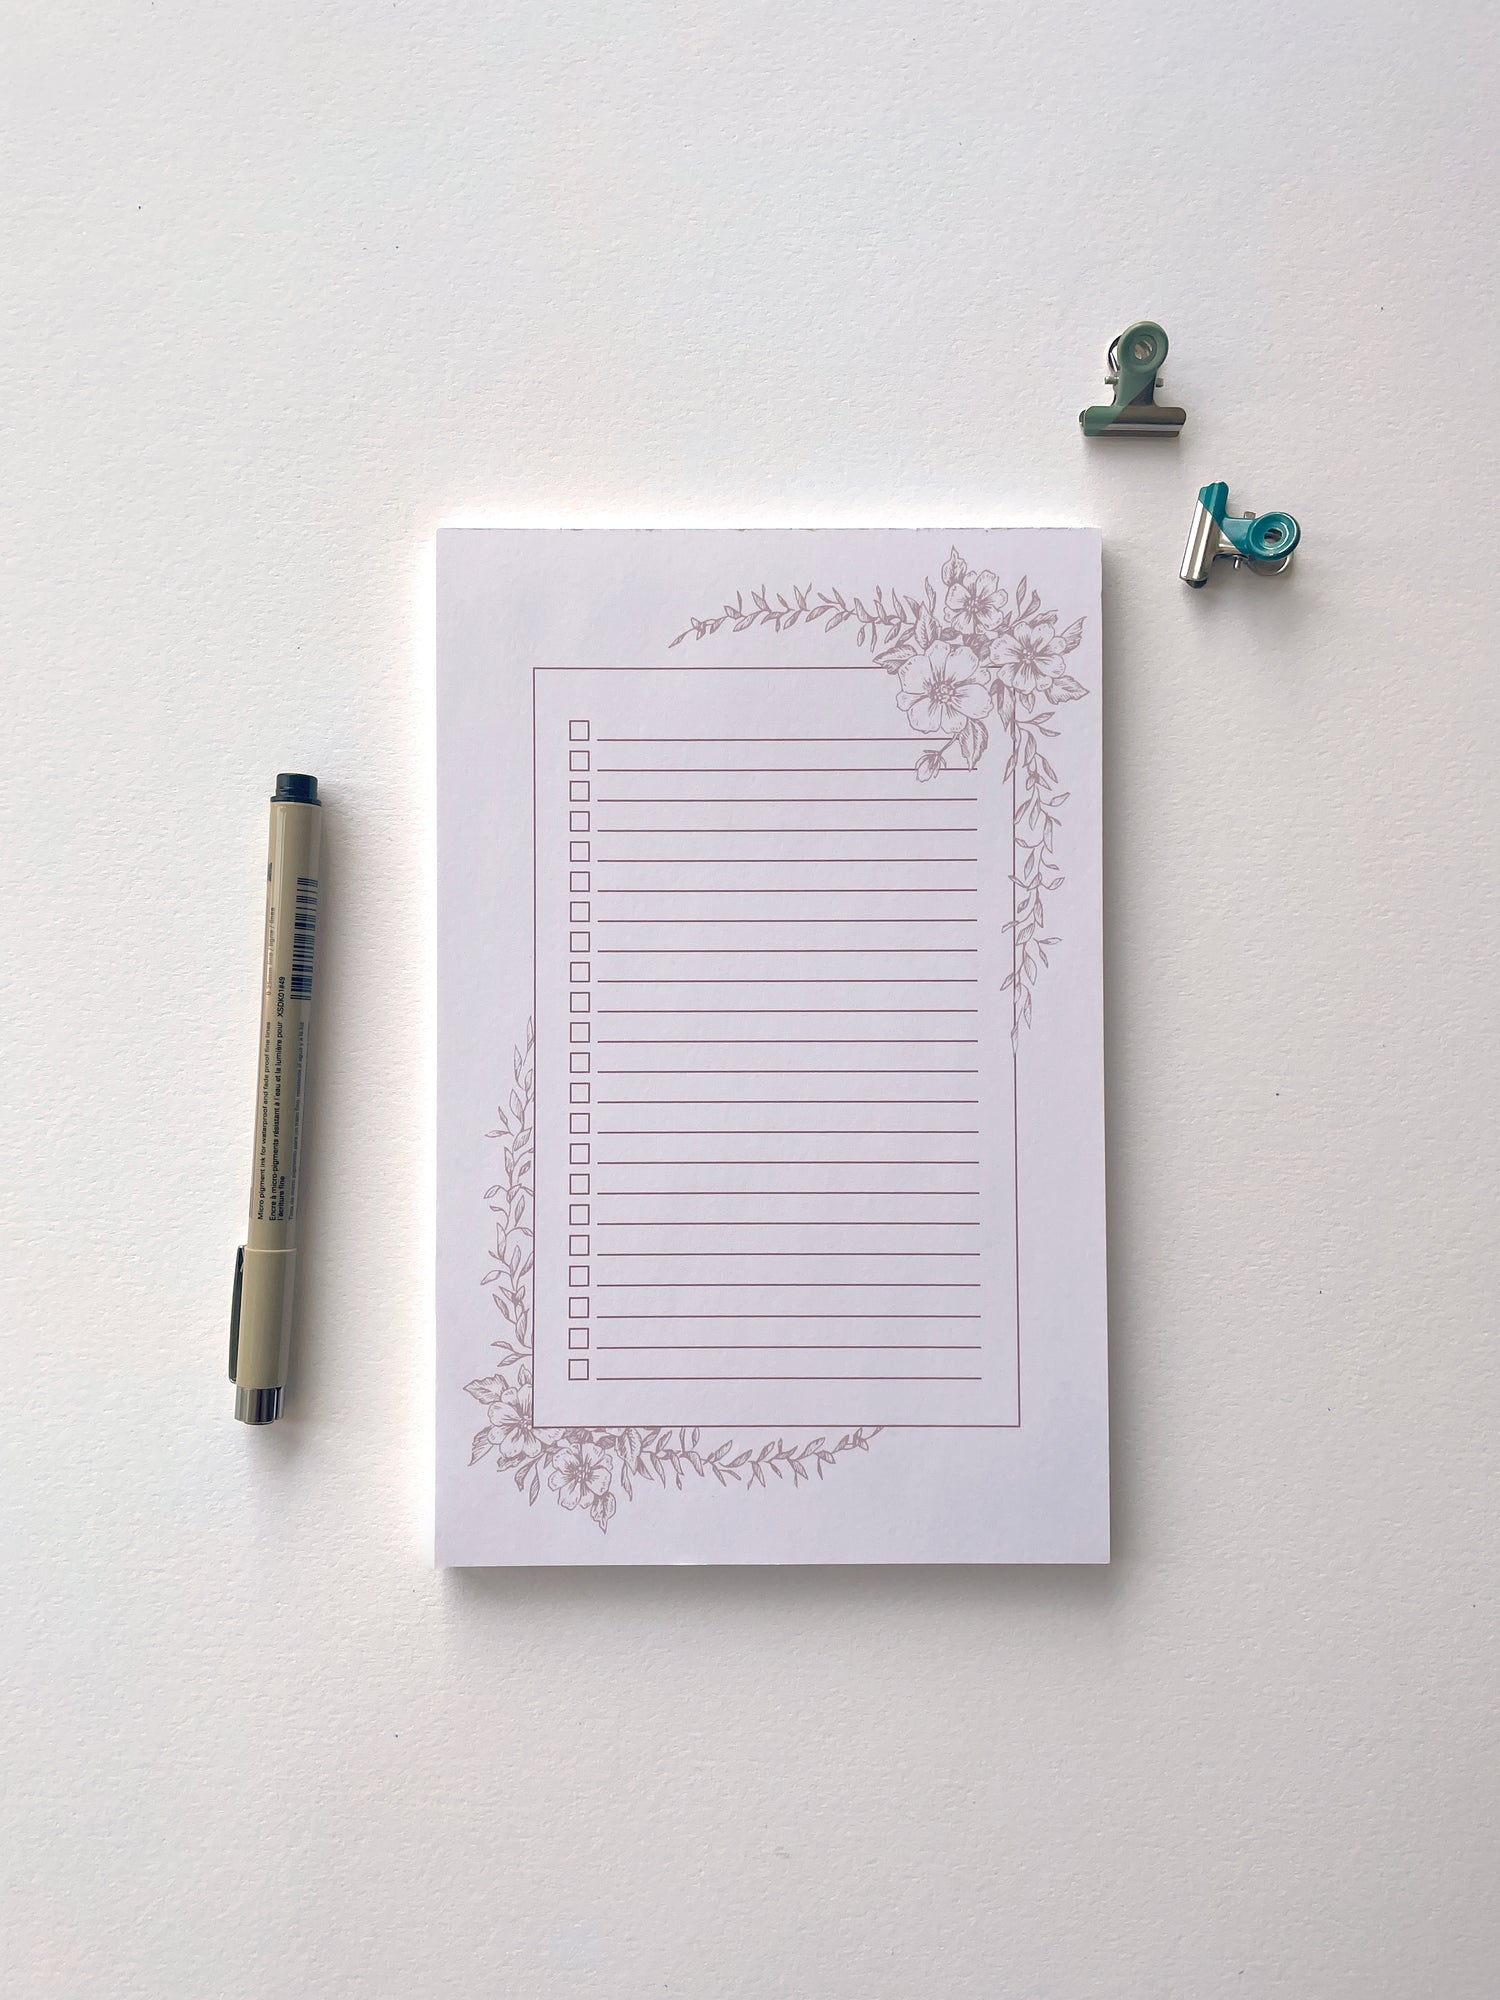 5.5 by 8.5 notepad with lined sheets with dusty rose florals  by Rust Belt Love